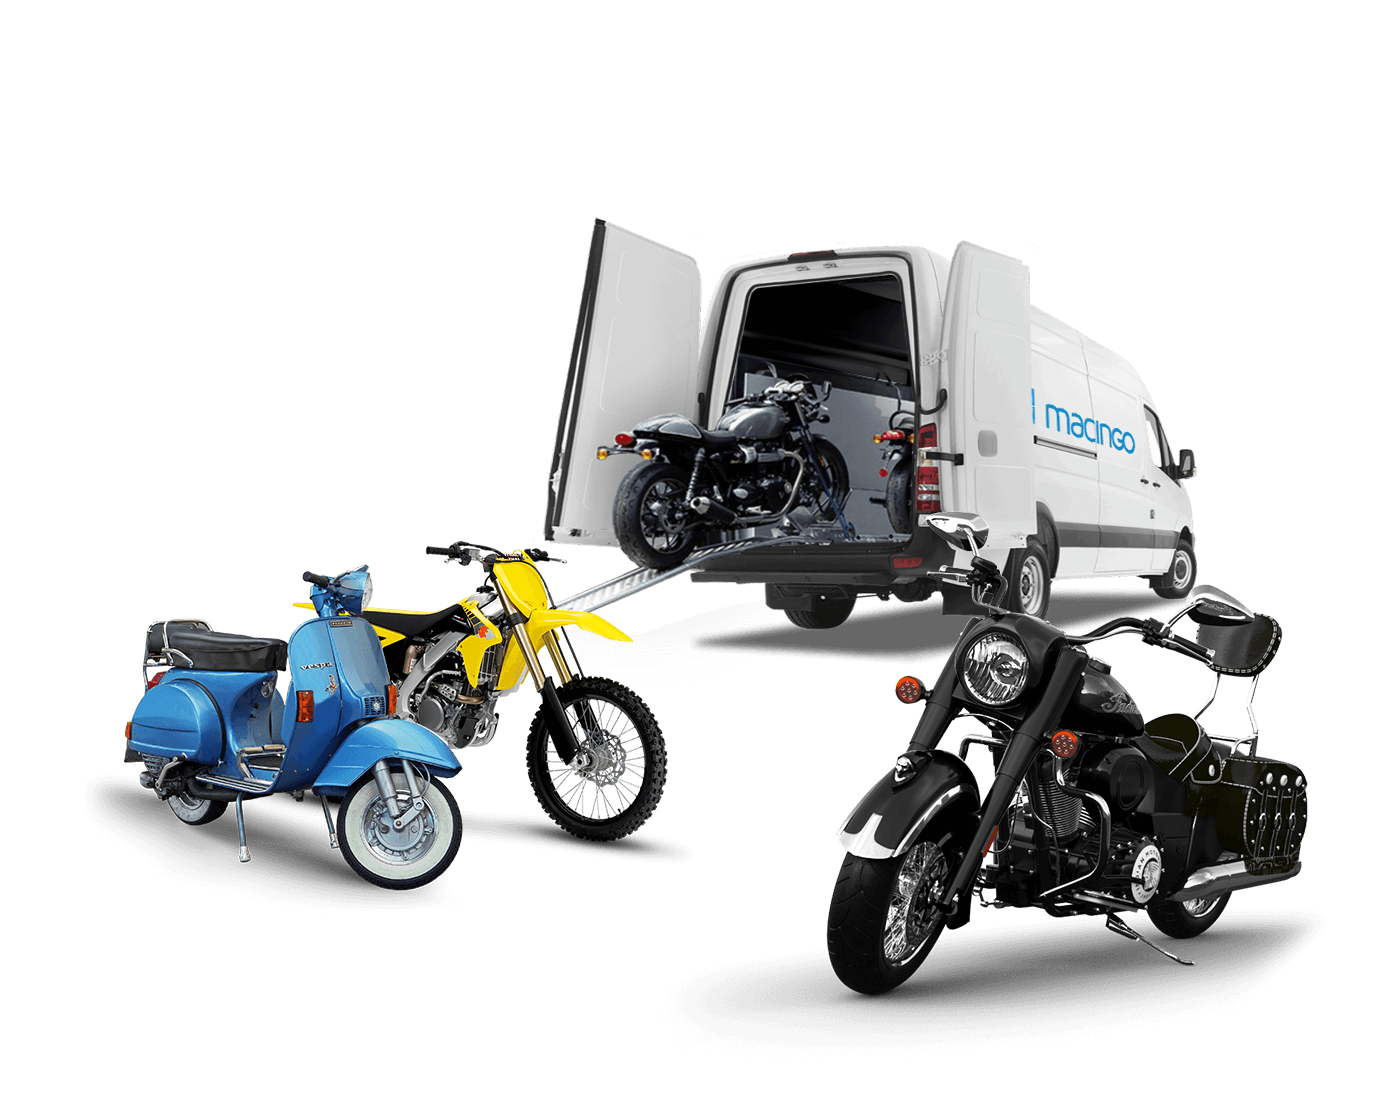 National and international shipment of motorcycles and scooters